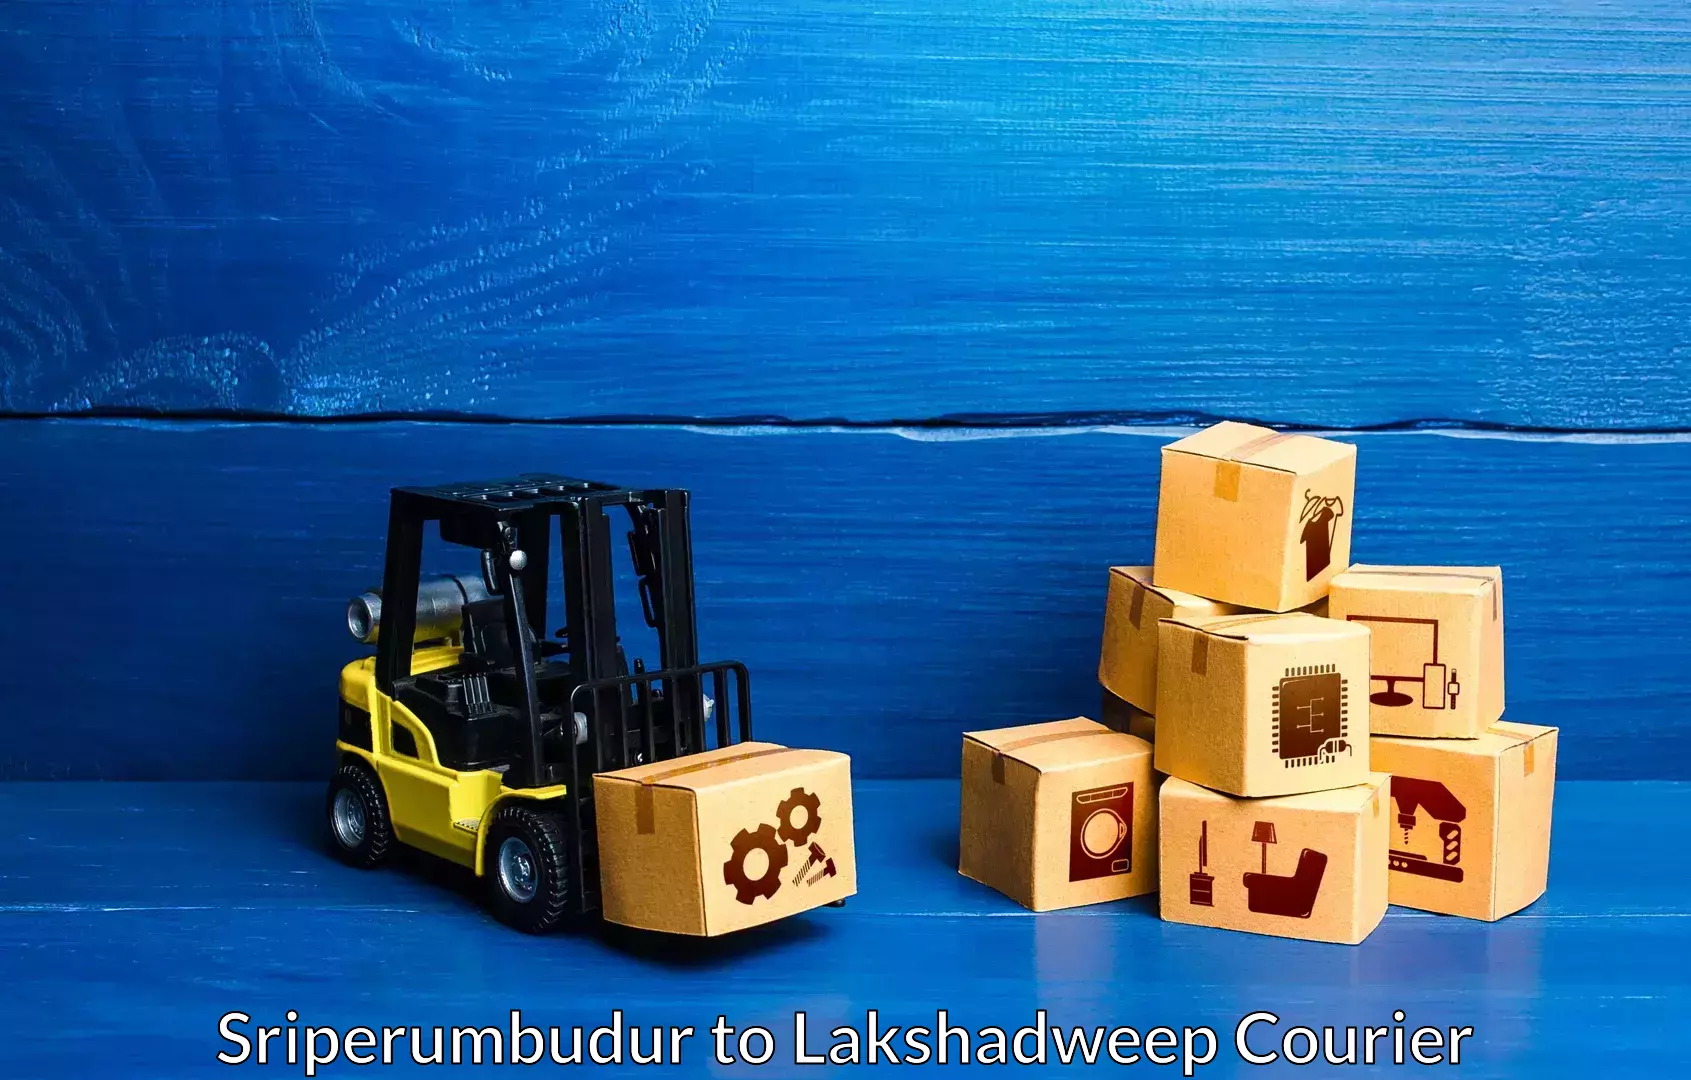 Efficient relocation services in Sriperumbudur to Lakshadweep